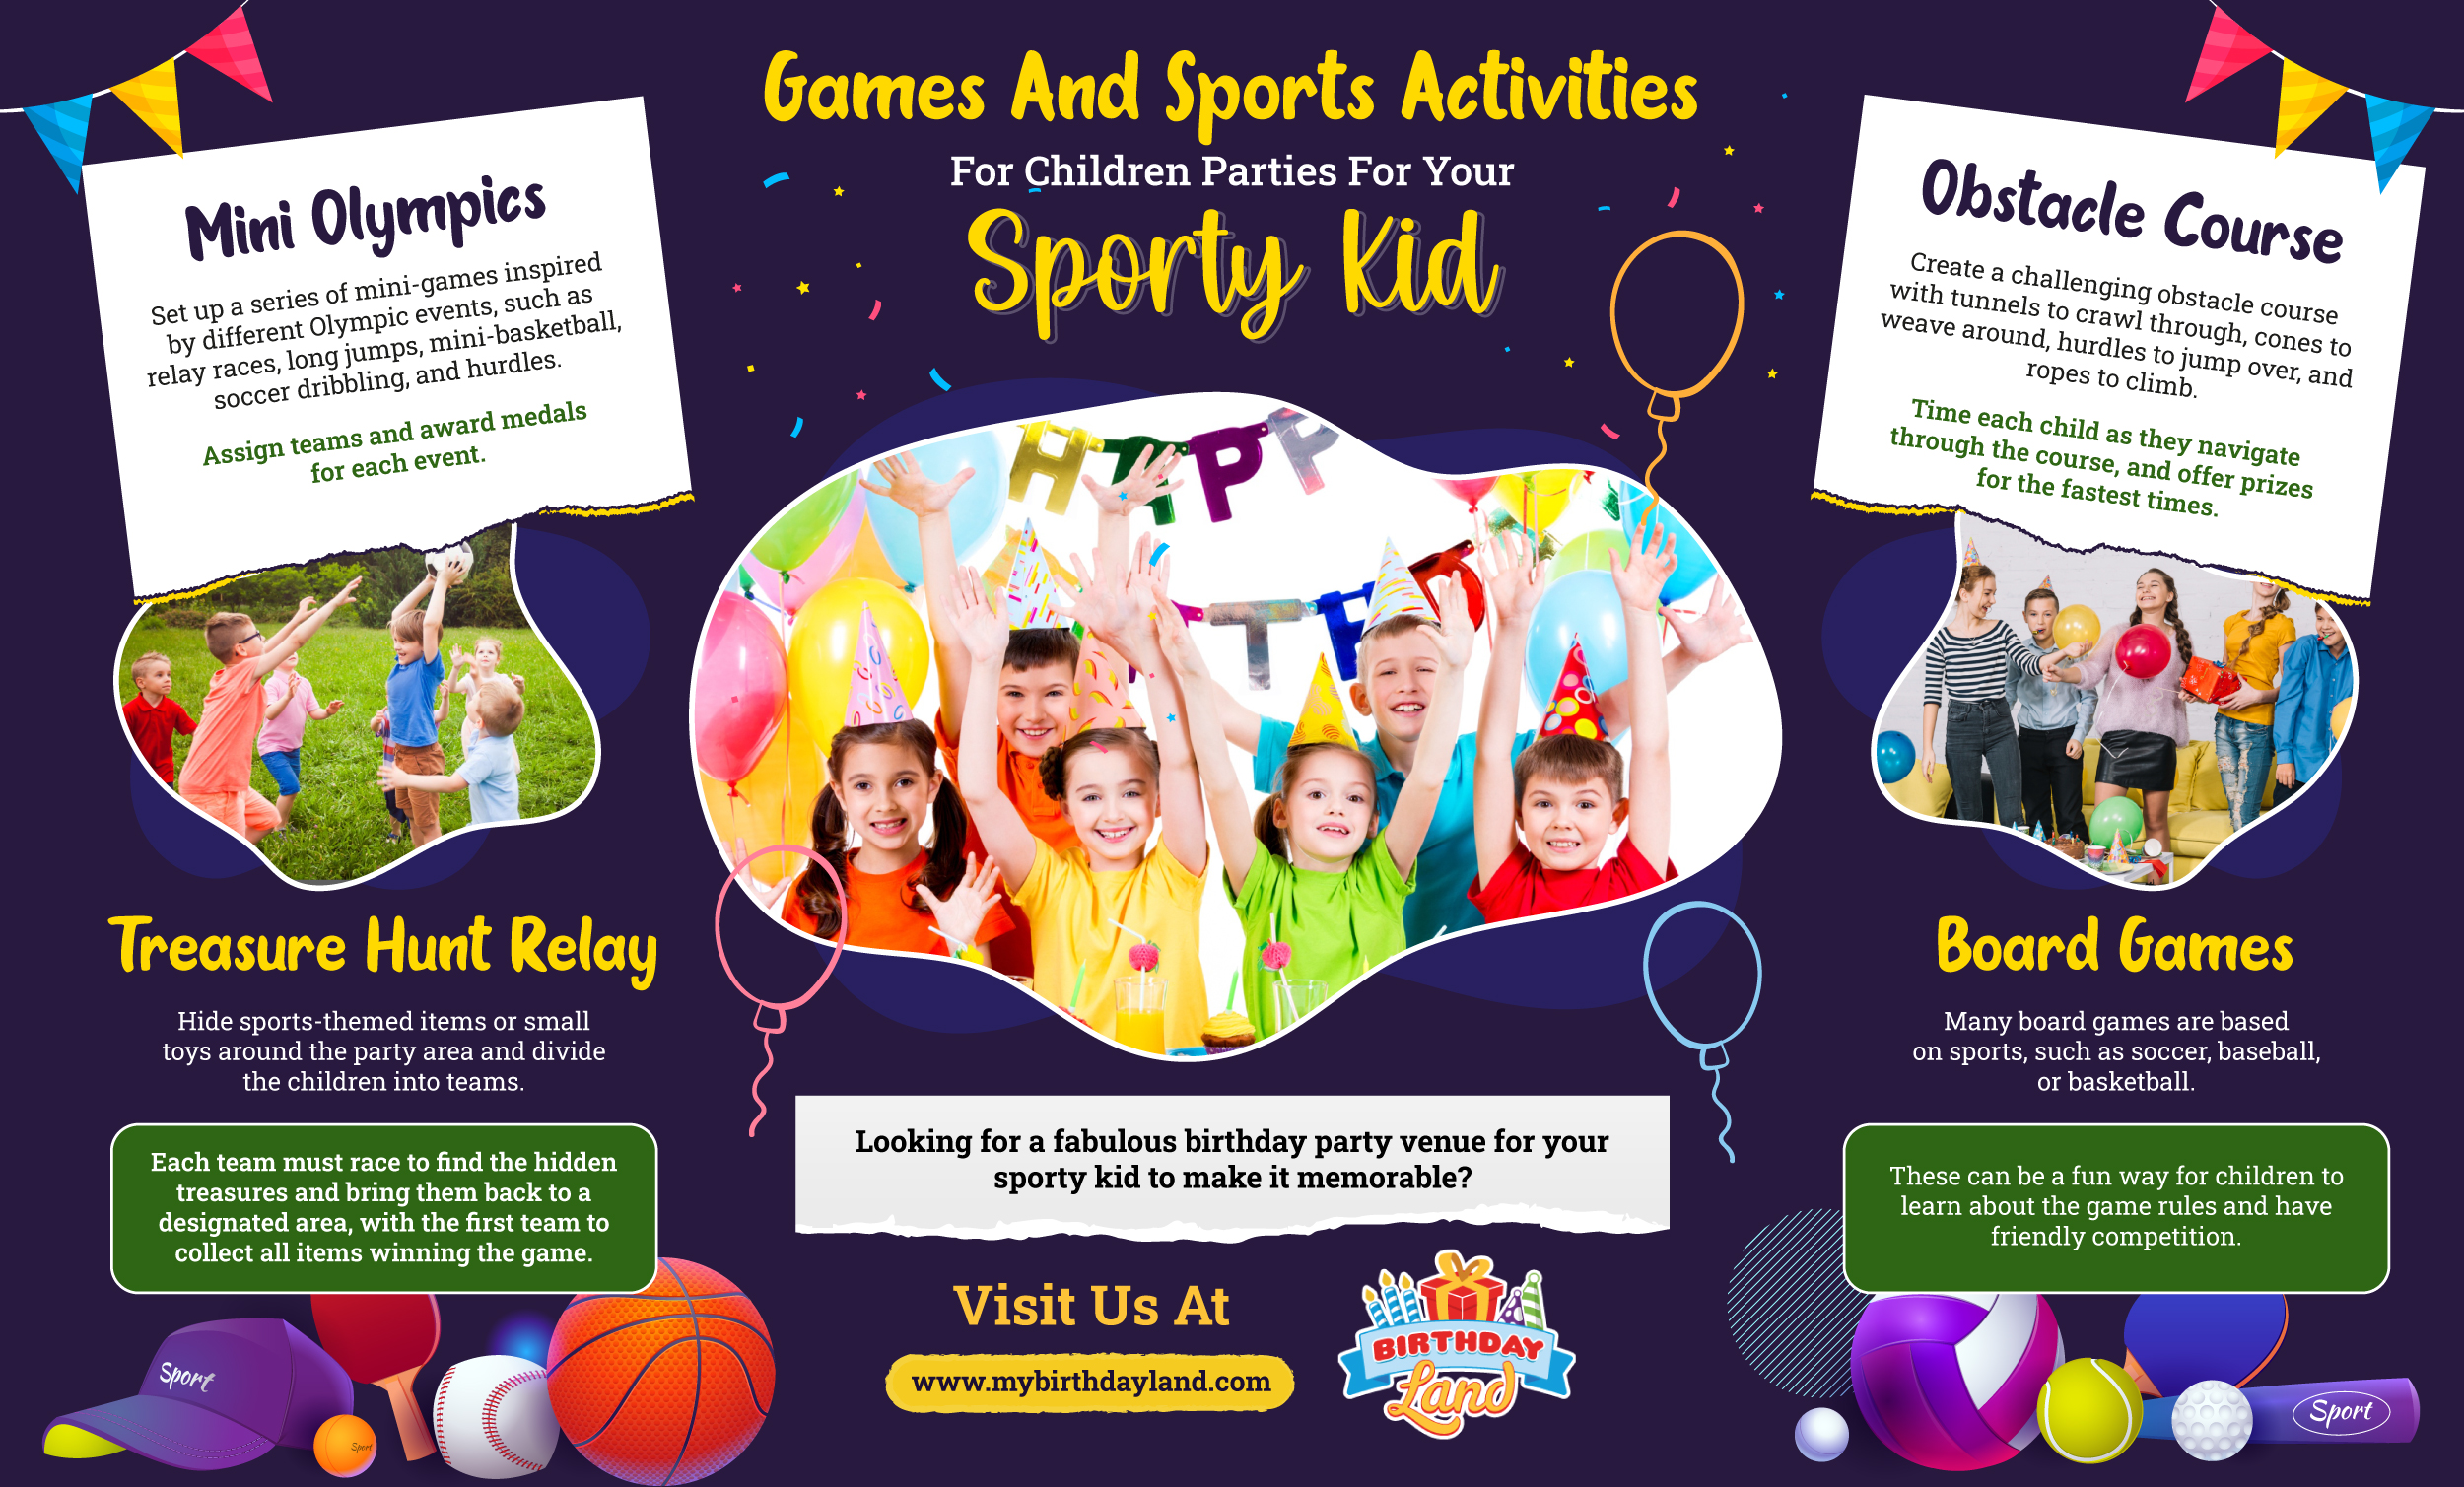 Games and Sports Activities for Children Parties For Your Sporty Kid